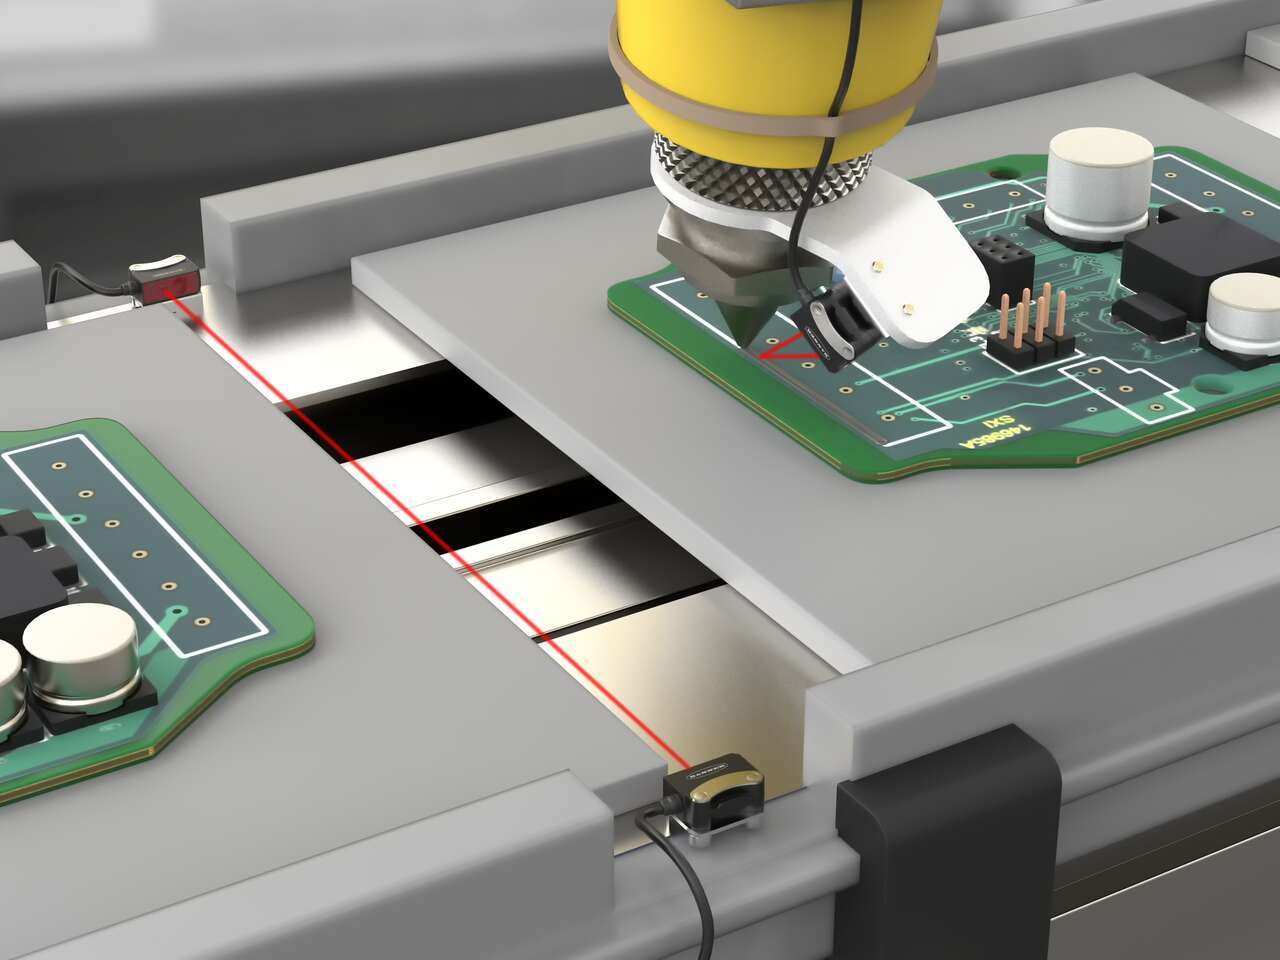 Real-Time Adhesive Detection in PCB Assembly